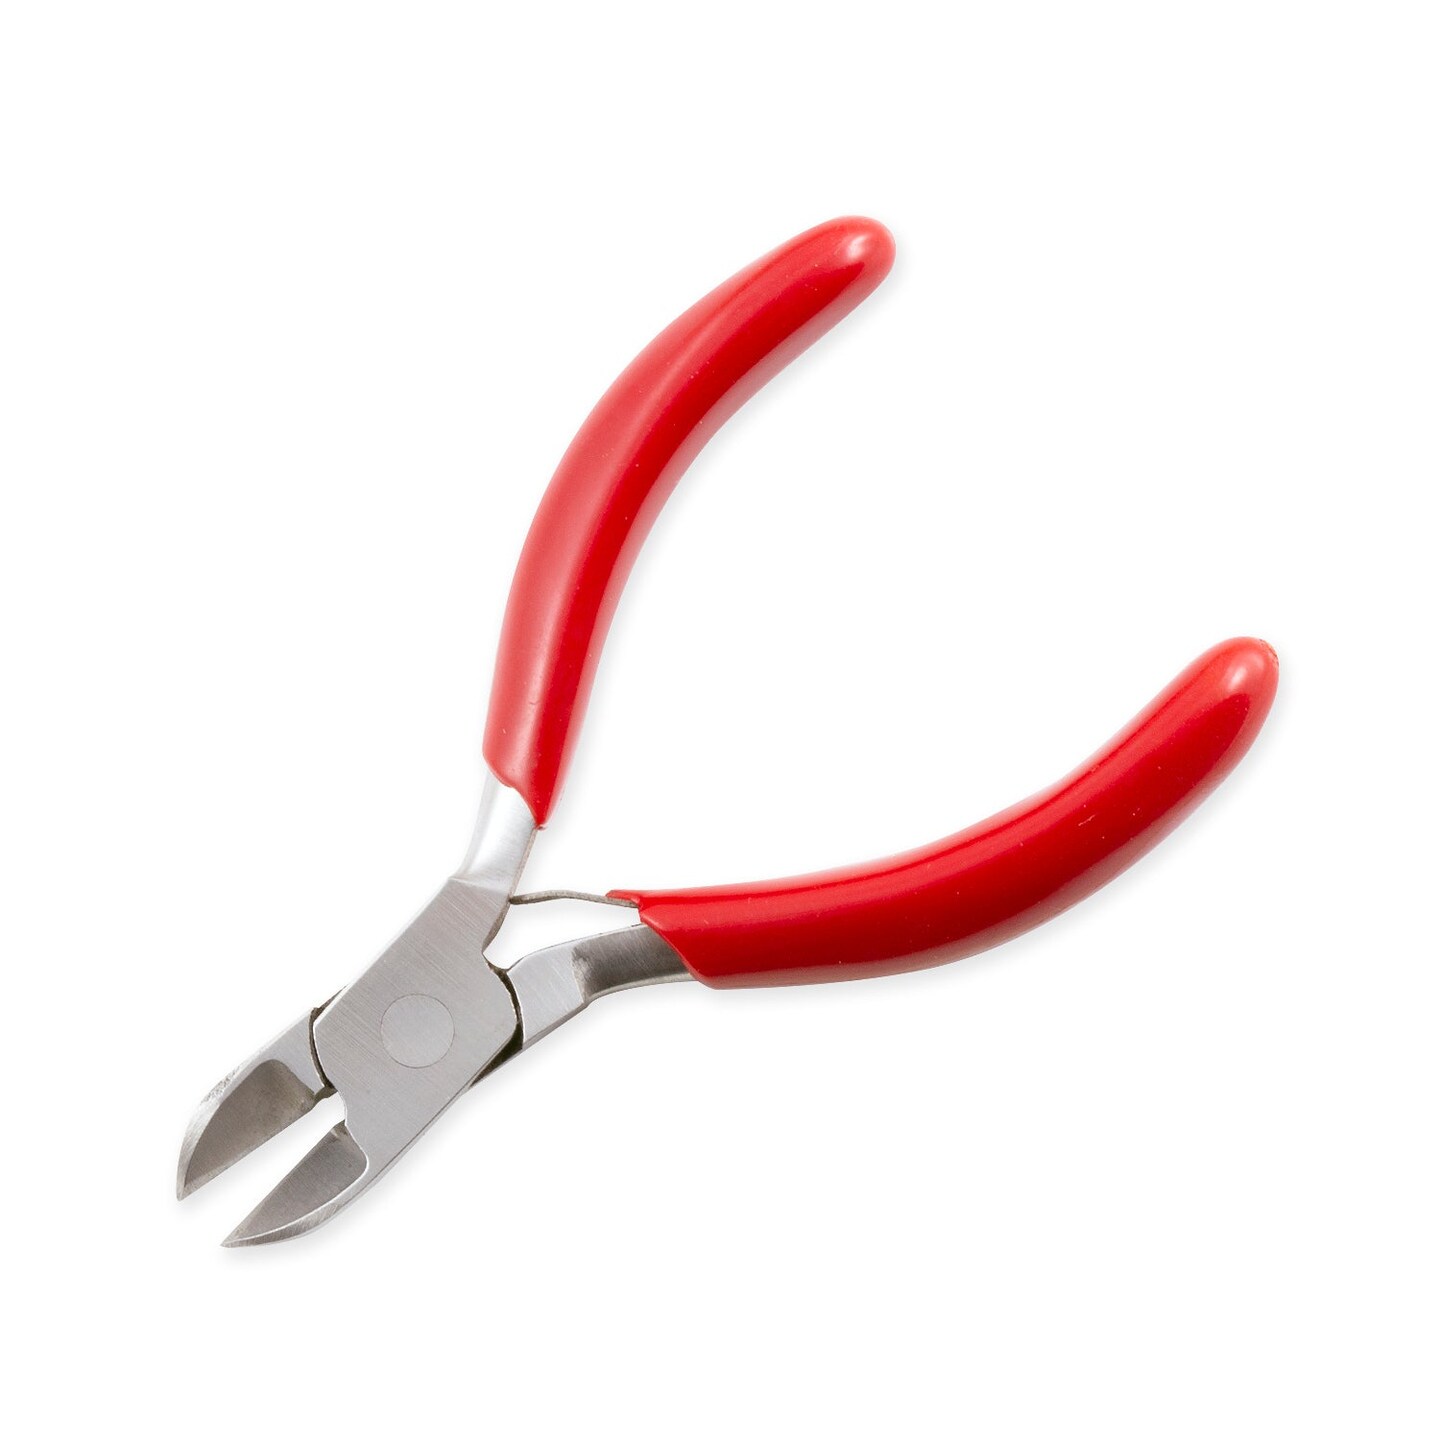 JewelrySupply Mini Side Cutting Pliers for your crafting and DIY projects